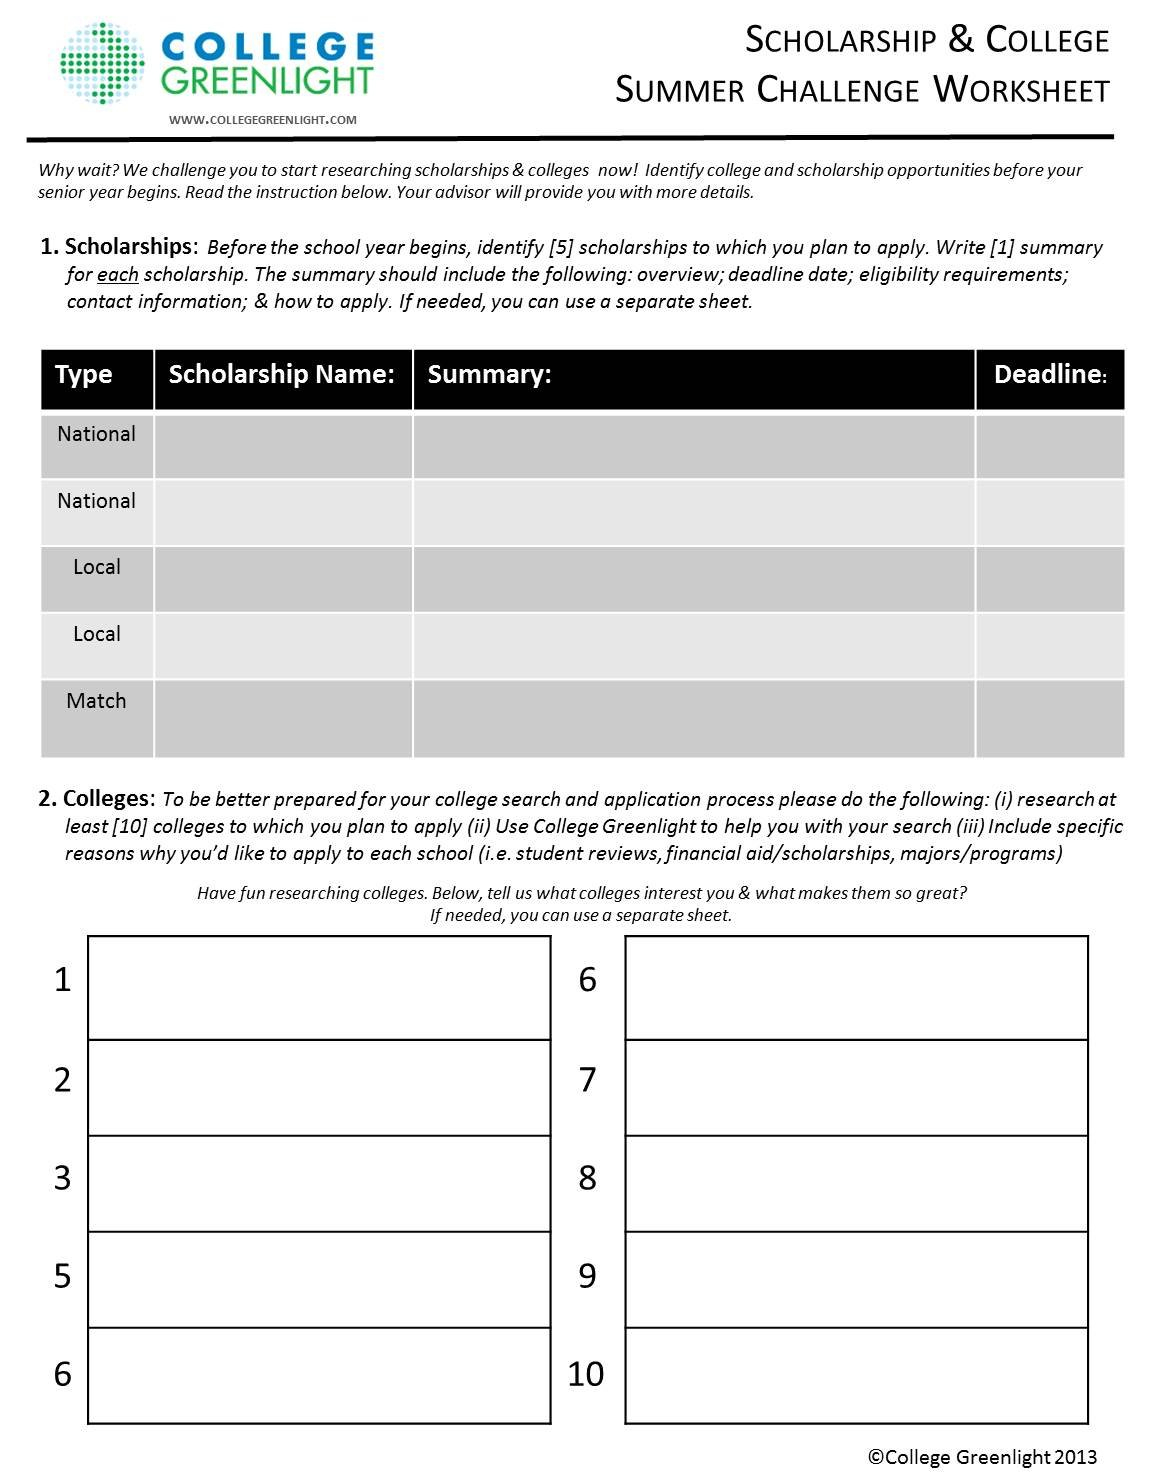 Build Your College And Scholarship List With This Helpful Worksheet Throughout College Research Worksheet